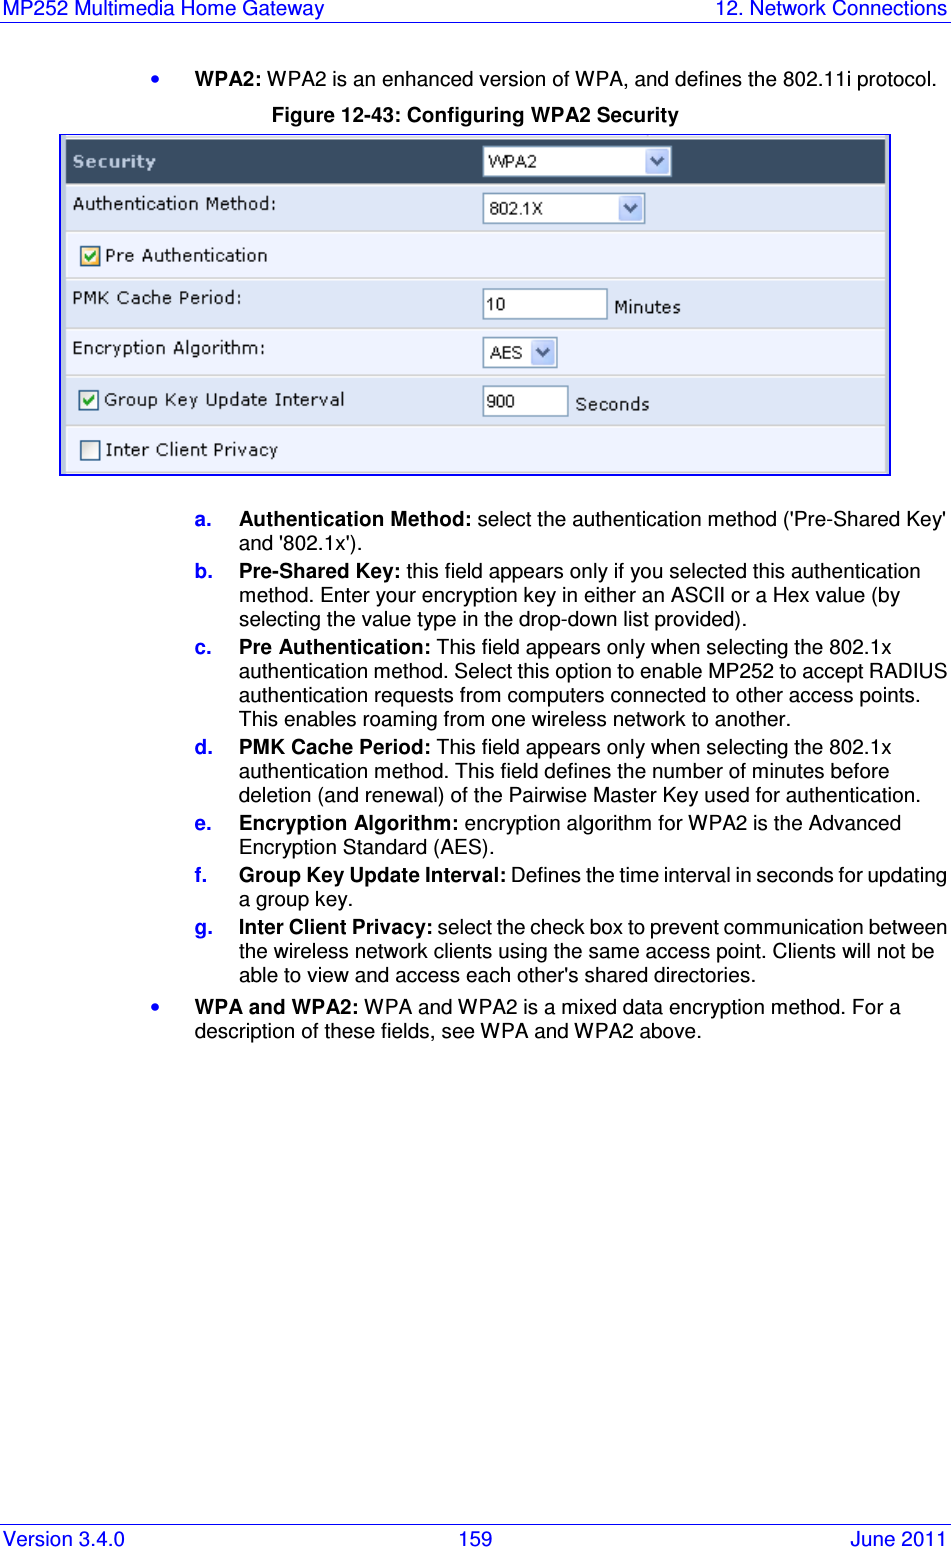 MP252 Multimedia Home Gateway  12. Network Connections Version 3.4.0  159  June 2011 • WPA2: WPA2 is an enhanced version of WPA, and defines the 802.11i protocol. Figure 12-43: Configuring WPA2 Security  a.  Authentication Method: select the authentication method (&apos;Pre-Shared Key&apos; and &apos;802.1x&apos;). b.  Pre-Shared Key: this field appears only if you selected this authentication method. Enter your encryption key in either an ASCII or a Hex value (by selecting the value type in the drop-down list provided). c.  Pre Authentication: This field appears only when selecting the 802.1x authentication method. Select this option to enable MP252 to accept RADIUS authentication requests from computers connected to other access points. This enables roaming from one wireless network to another. d.  PMK Cache Period: This field appears only when selecting the 802.1x authentication method. This field defines the number of minutes before deletion (and renewal) of the Pairwise Master Key used for authentication. e.  Encryption Algorithm: encryption algorithm for WPA2 is the Advanced Encryption Standard (AES). f.  Group Key Update Interval: Defines the time interval in seconds for updating a group key. g.  Inter Client Privacy: select the check box to prevent communication between the wireless network clients using the same access point. Clients will not be able to view and access each other&apos;s shared directories. • WPA and WPA2: WPA and WPA2 is a mixed data encryption method. For a description of these fields, see WPA and WPA2 above. 